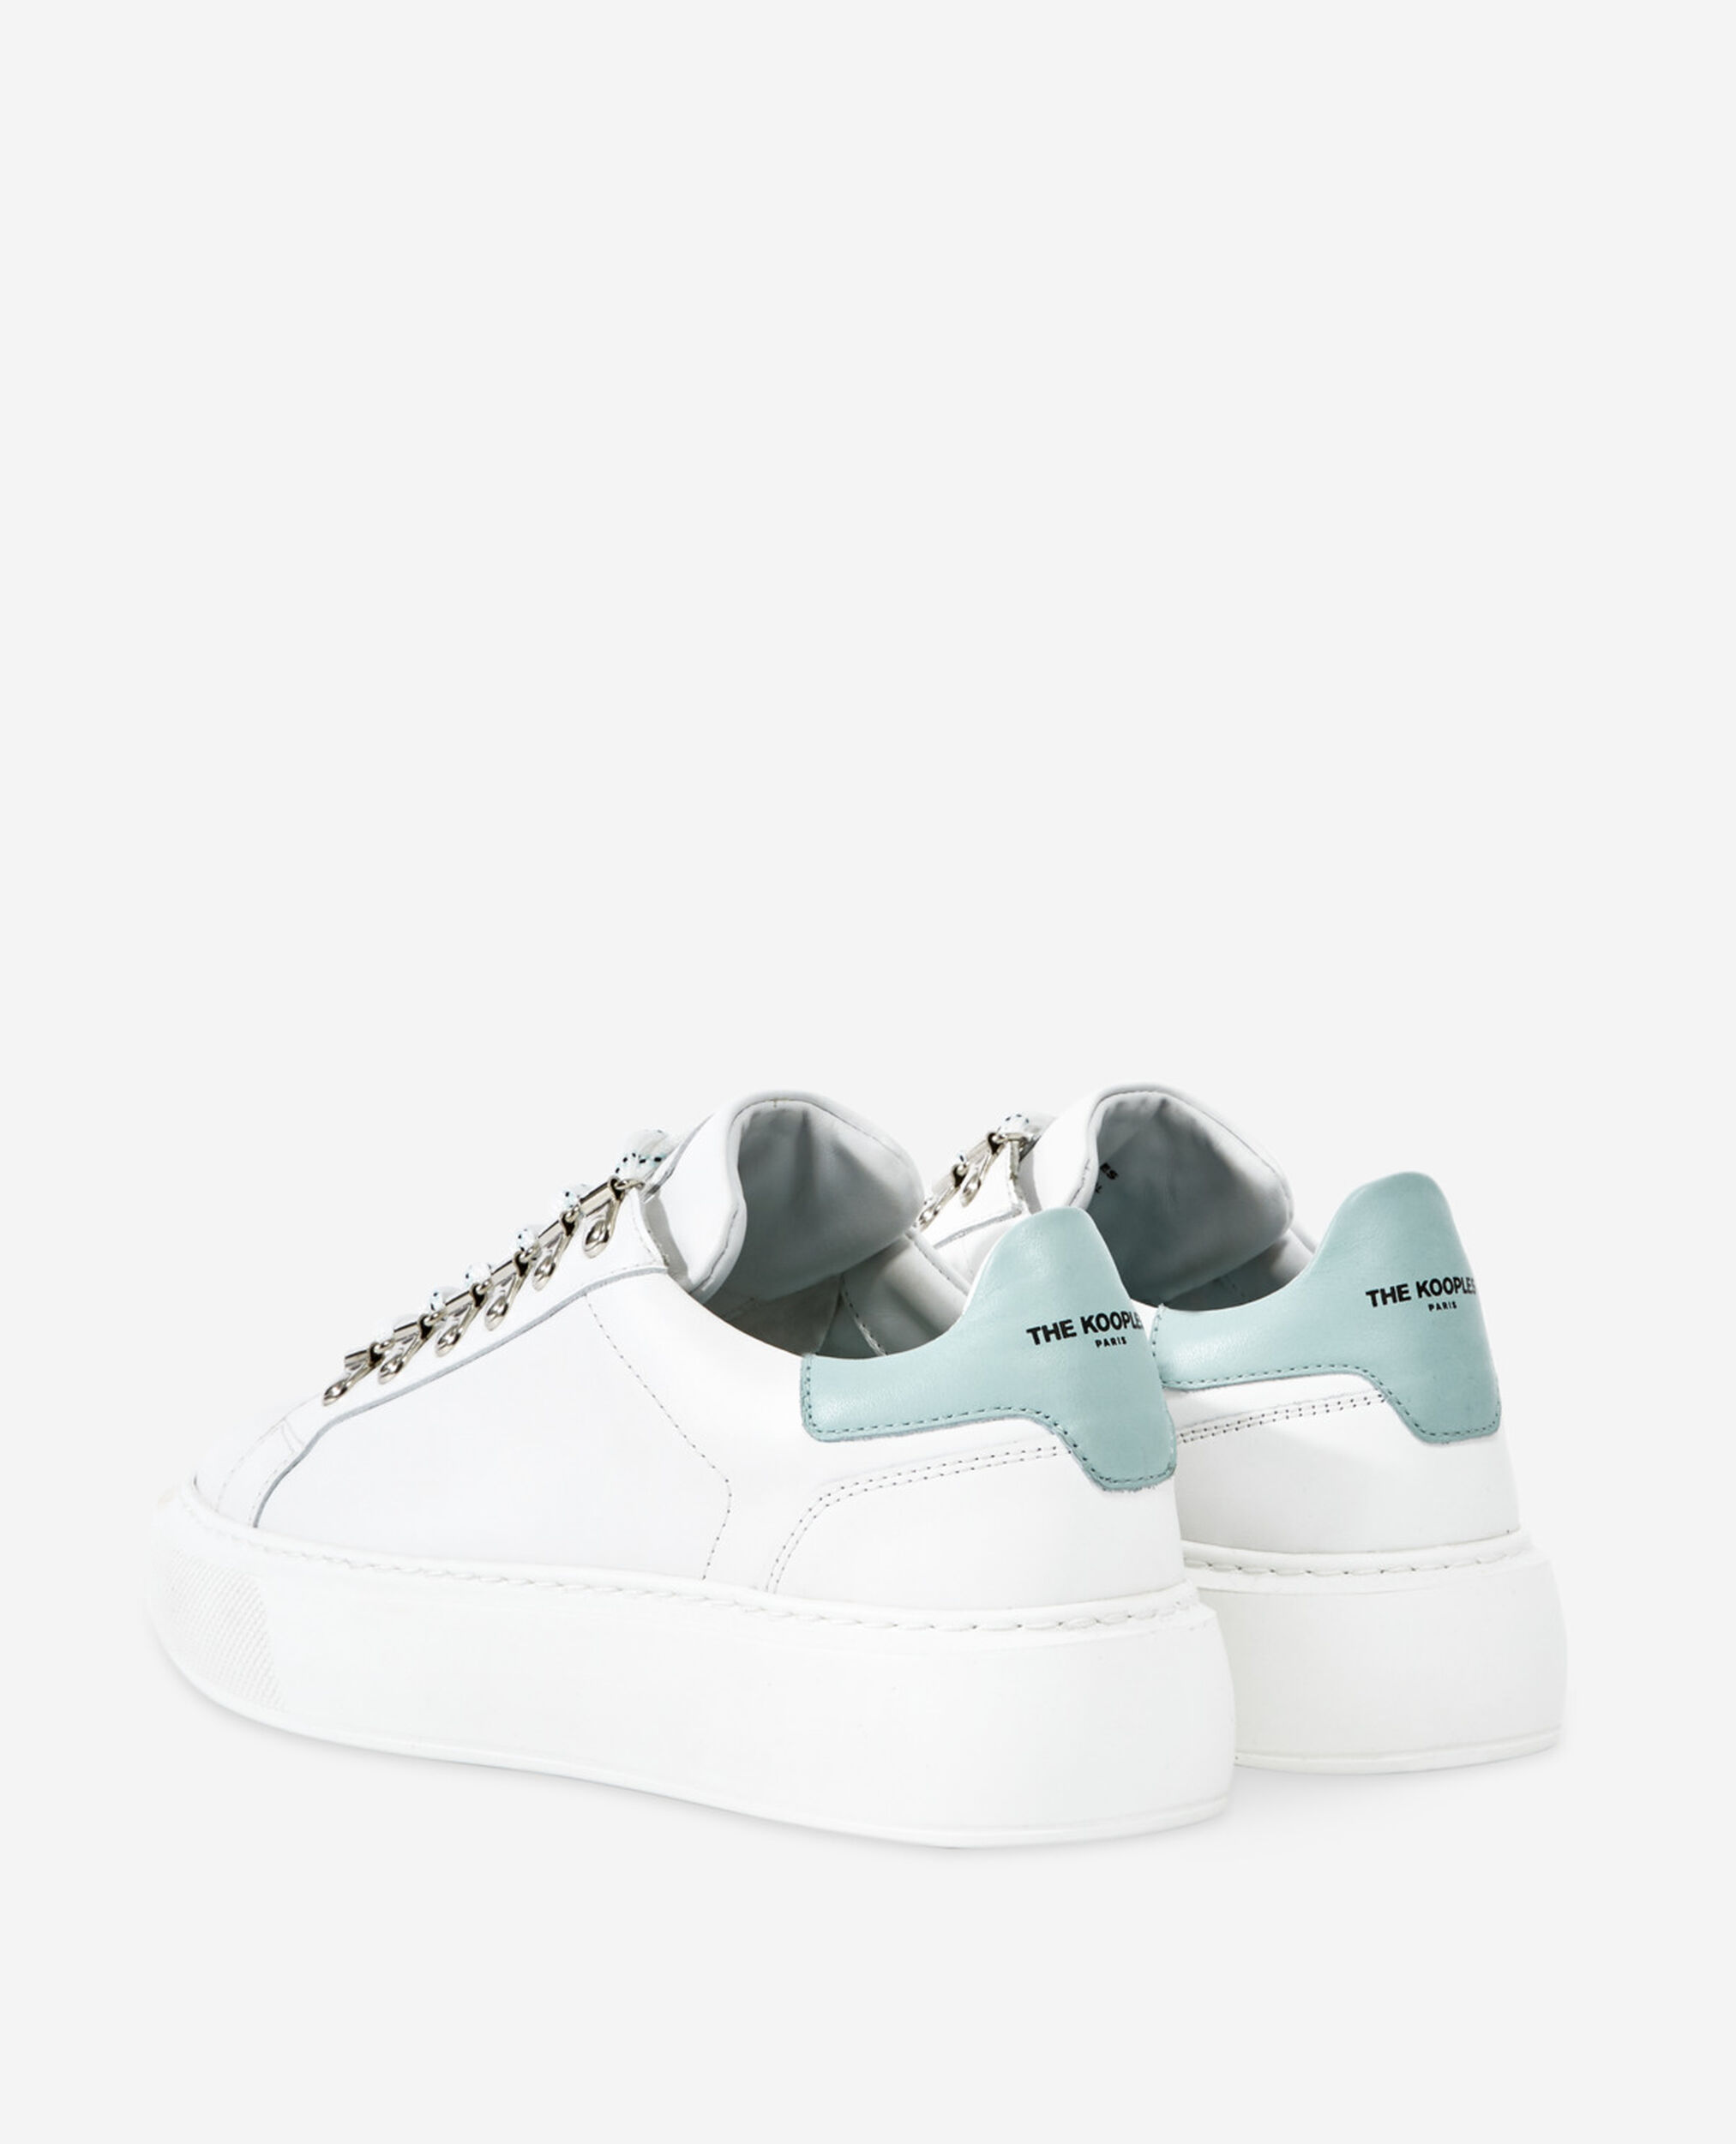 Leather sneakers, WHITE / GREY, hi-res image number null